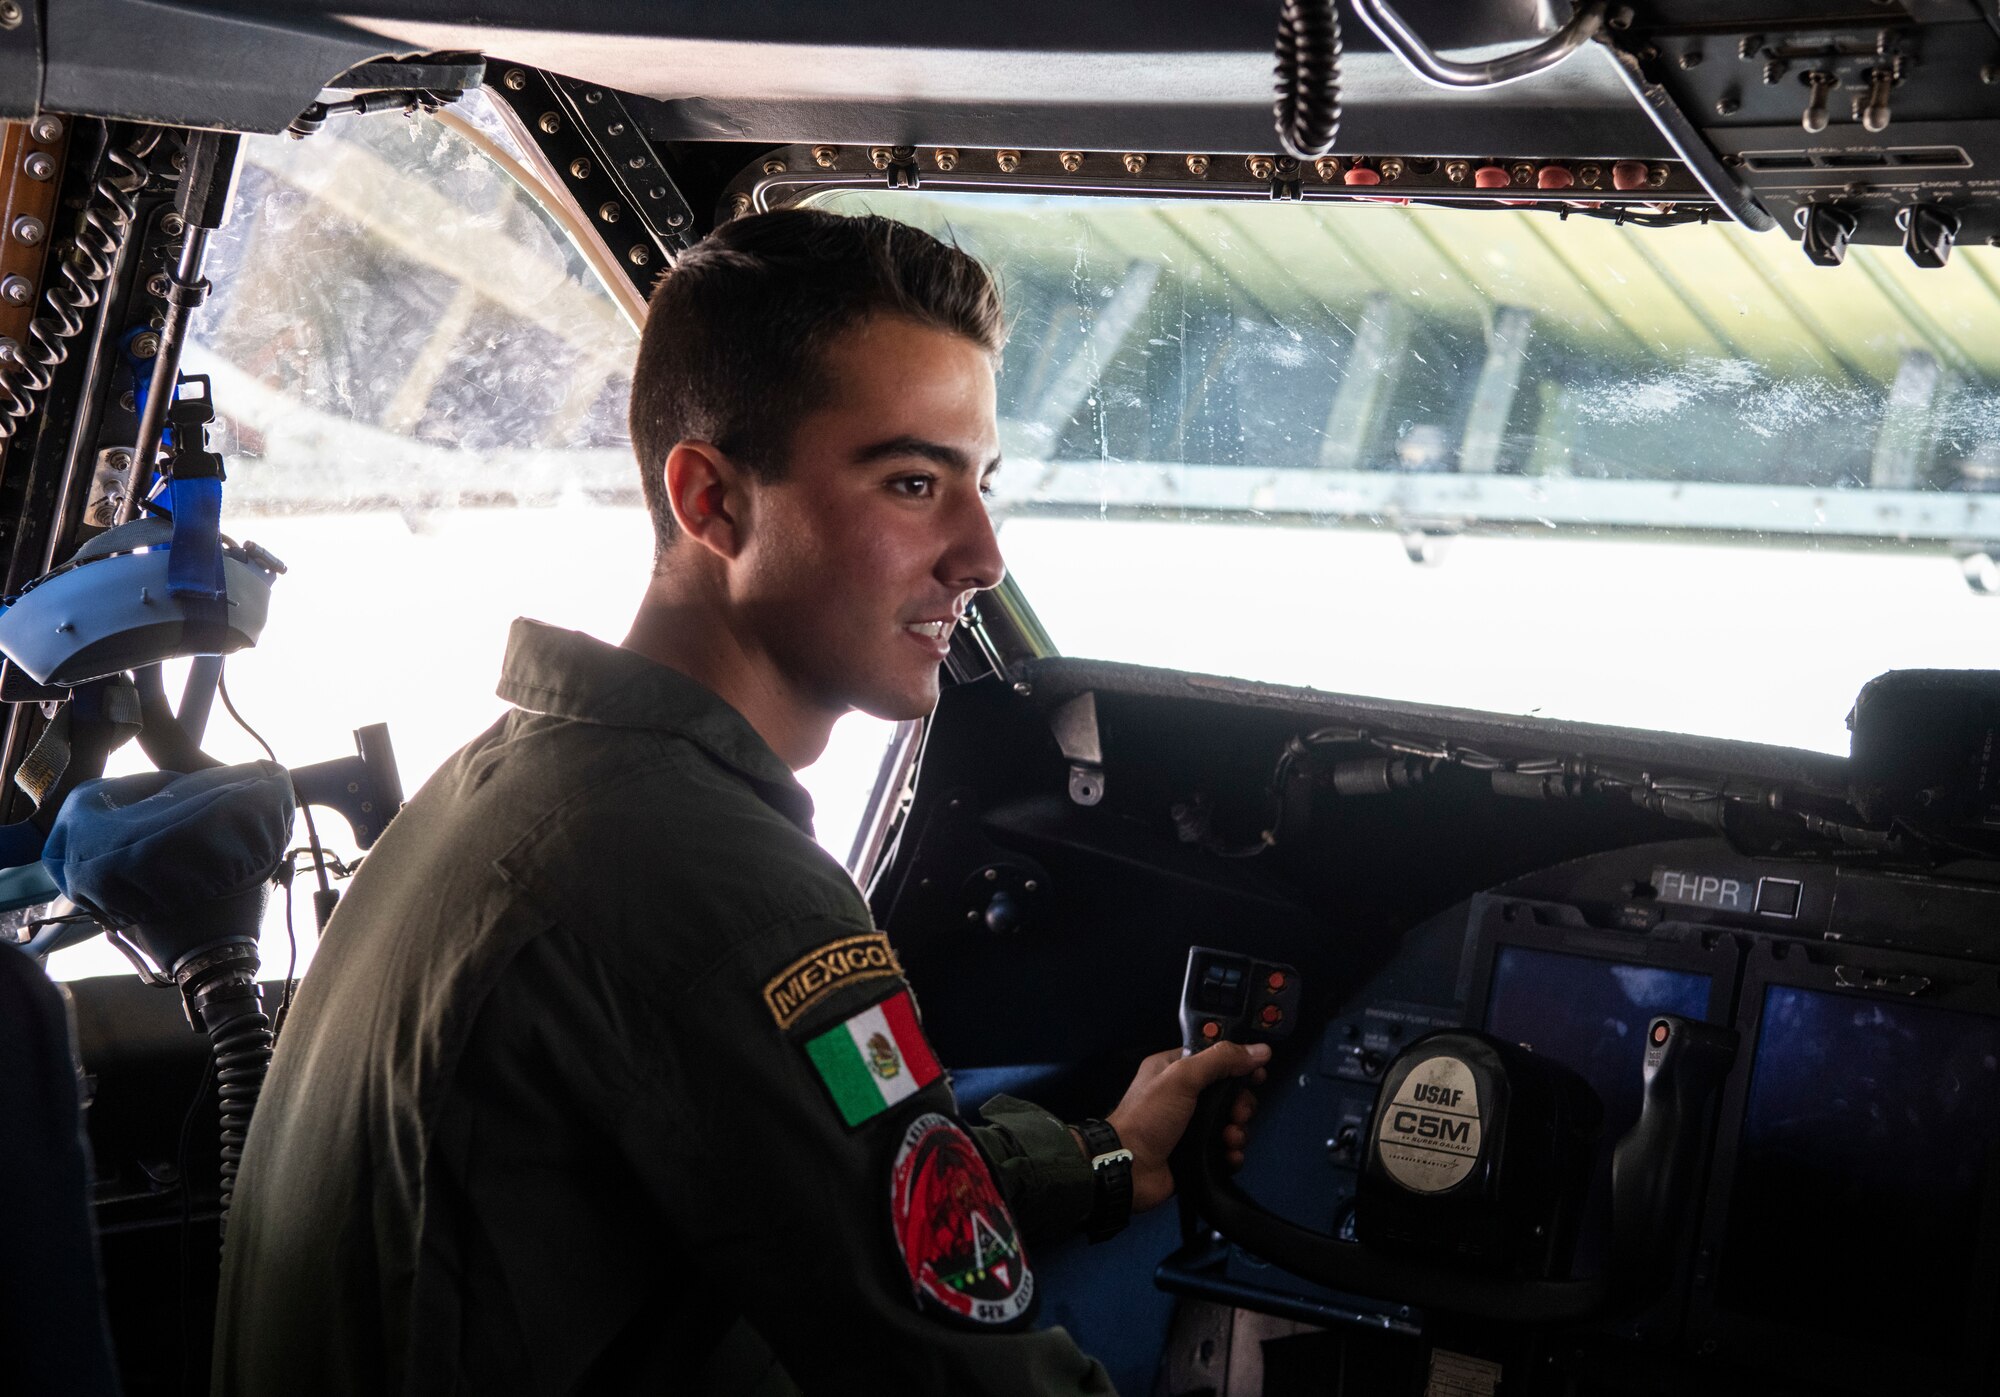 Jose de Jesus Duenas Garcia, Mexican cadet, sits in the pilot seat of a C-5M Super Galaxy during their visit Oct. 17, 2019, at Dover Air Force Base, Del. The C-5M Super Galaxy is equipped with 28 wheels, four commercial engines and five sets of landing gear. (U.S. Air Force photo by Senior Airman Christopher Quail)